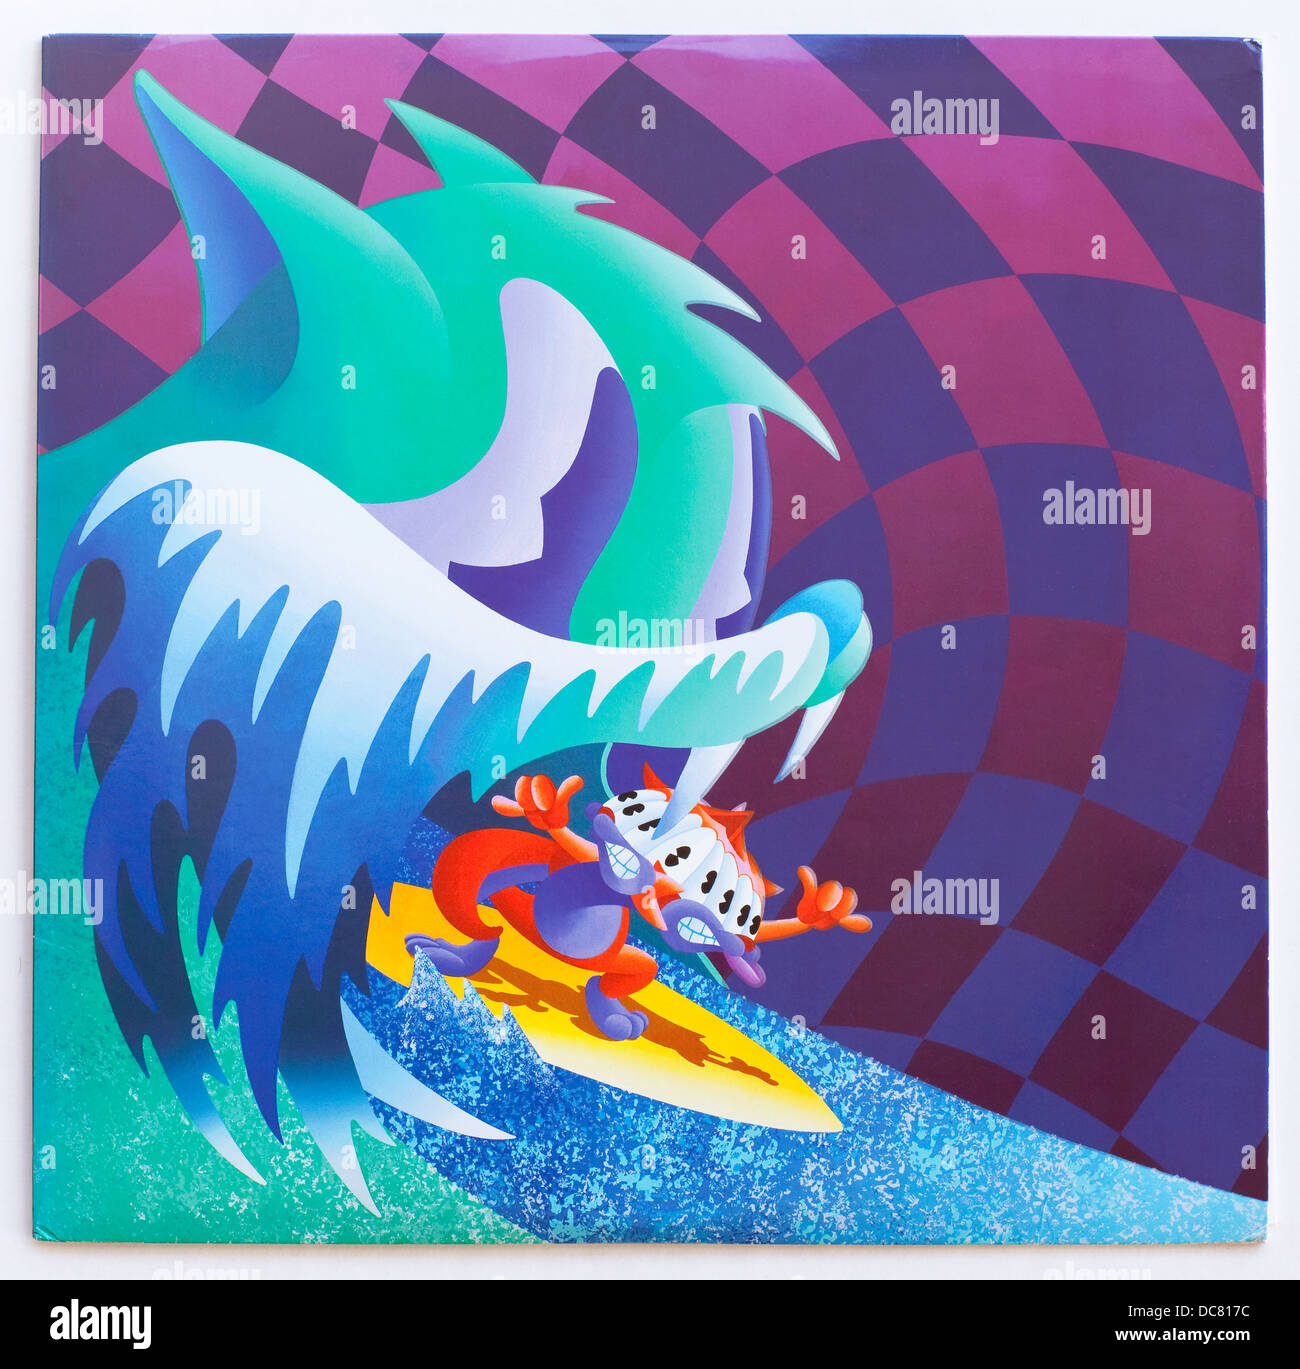 MGMT - Congratulations, 2010 album on Columbia Records - Editorial use only  Stock Photo - Alamy